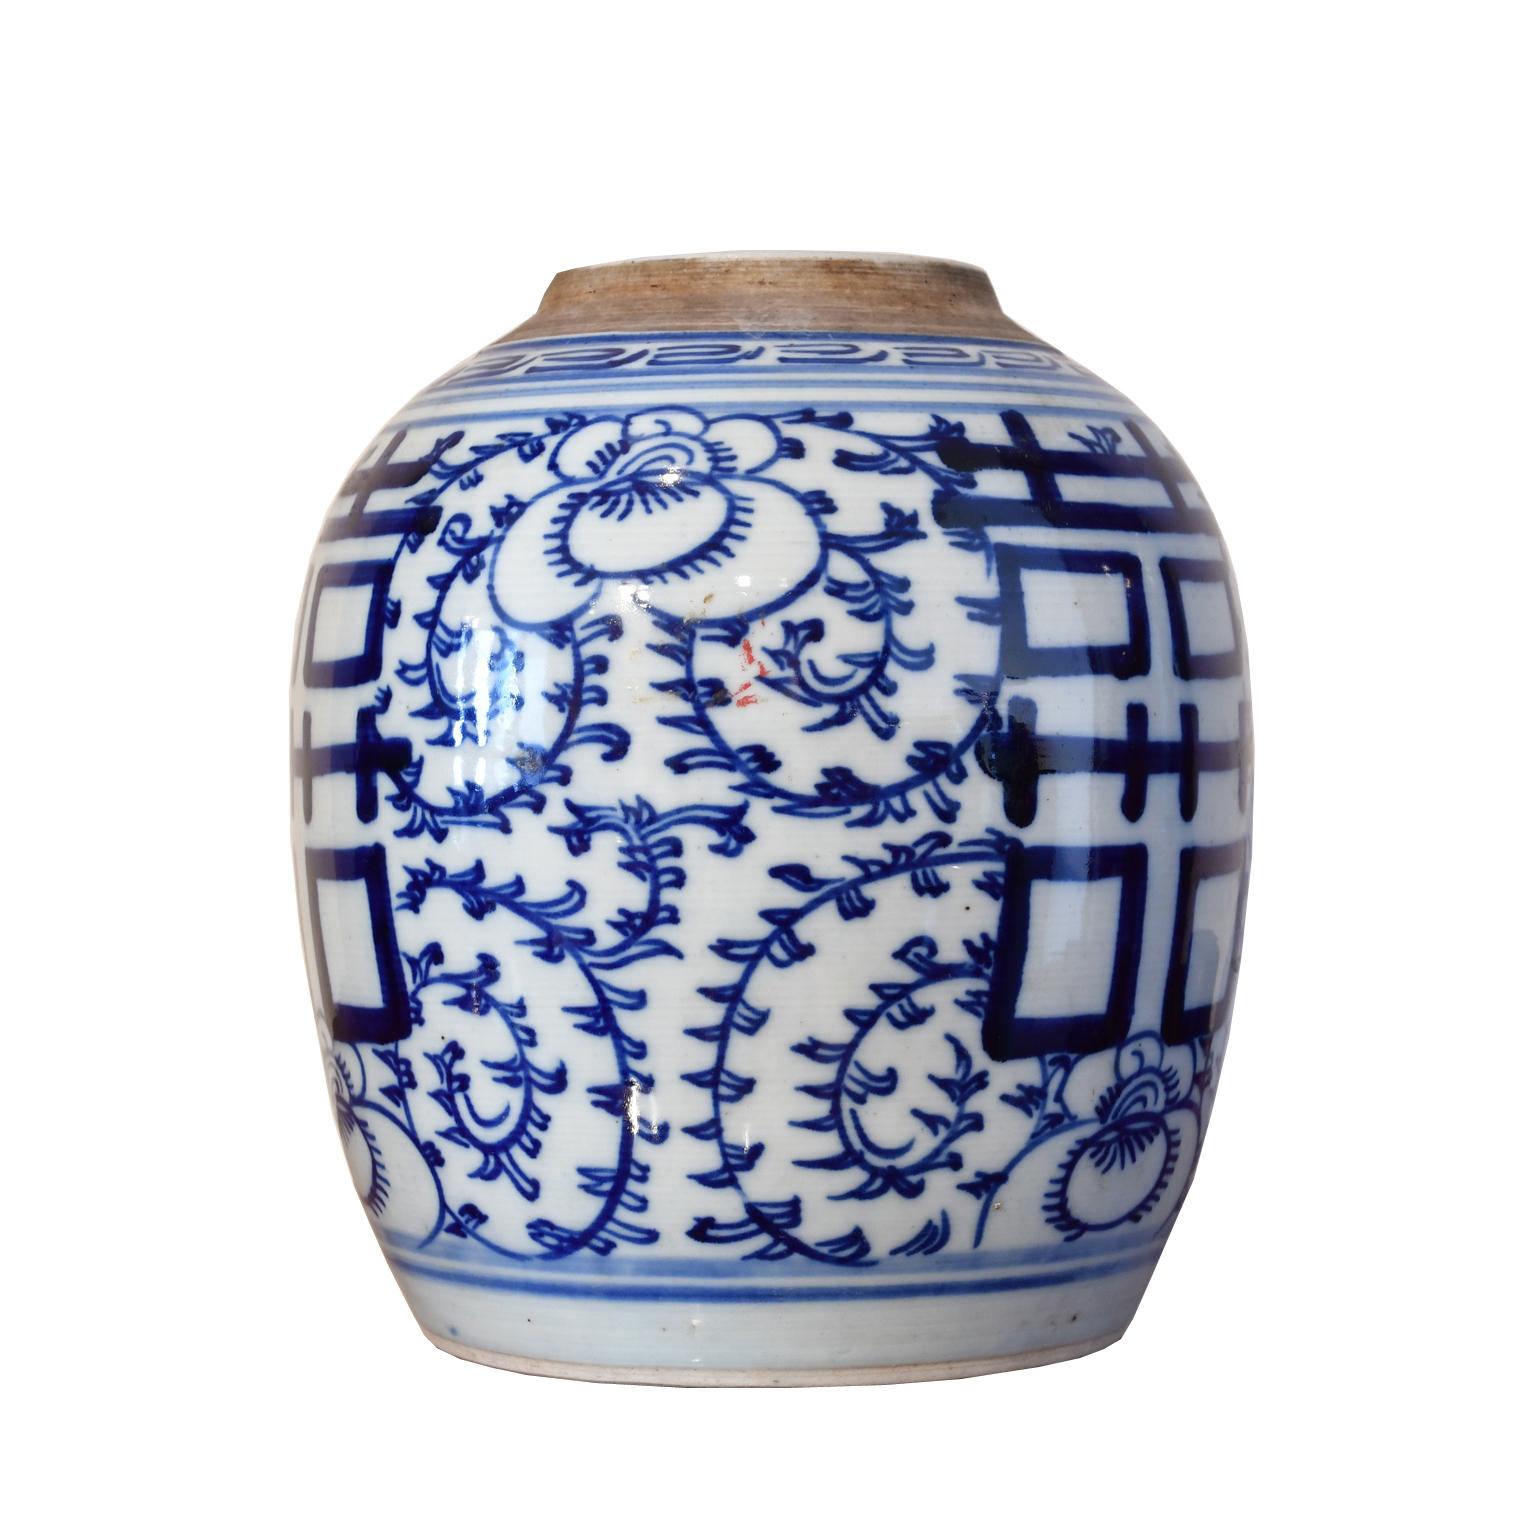 A Qing Chinese porcelain jar with hand painted cobalt blue decoration of 